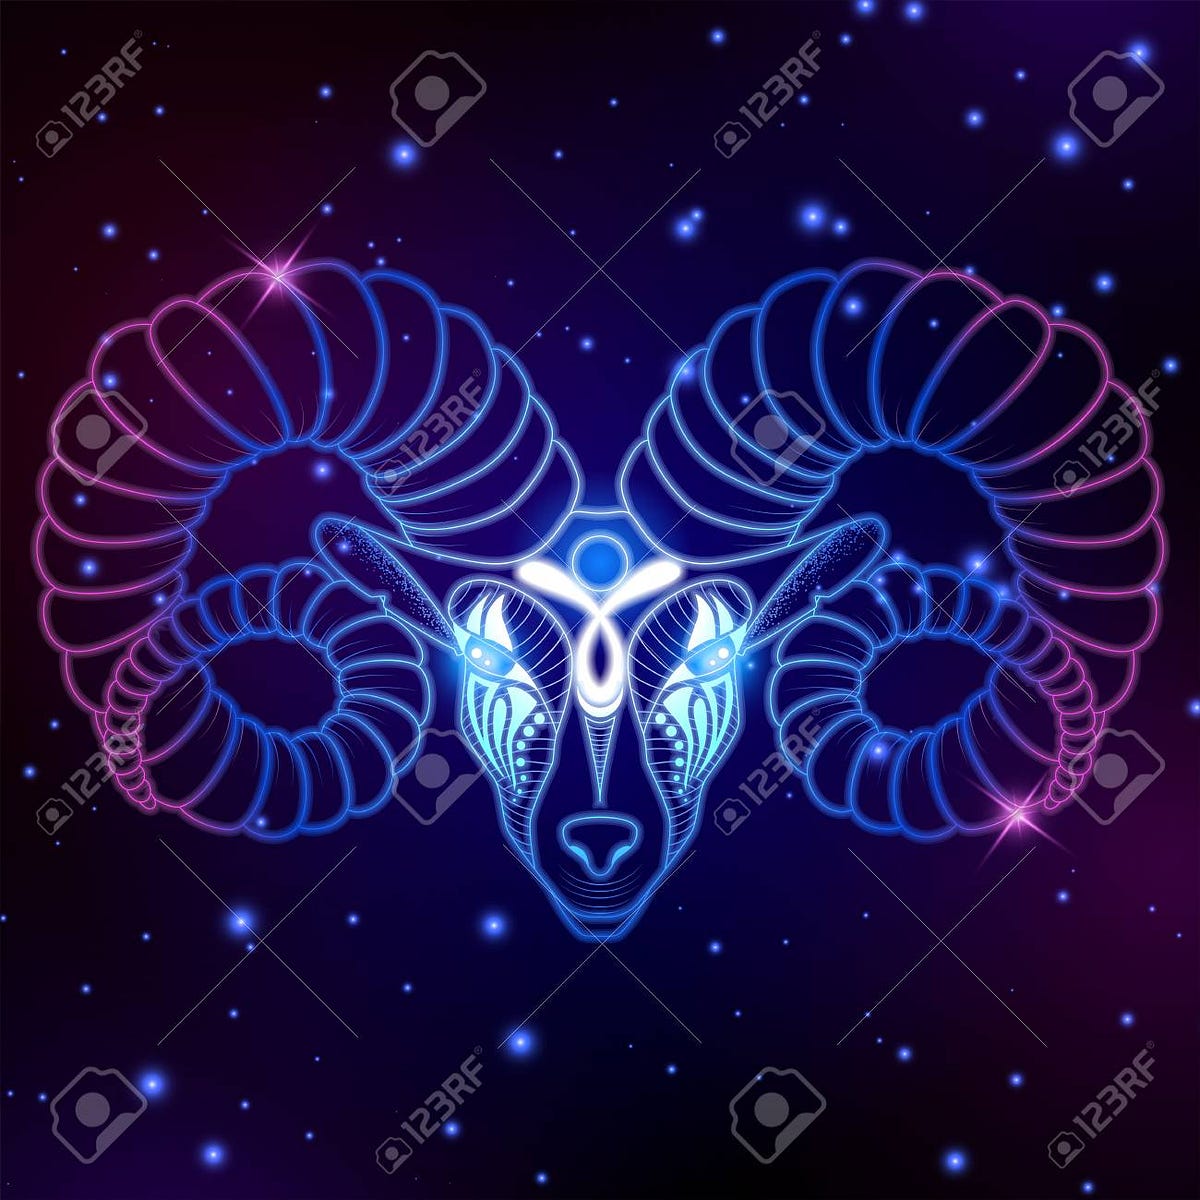 What you must know about Aries Zodiac sign? | by Aurobindhan | Medium